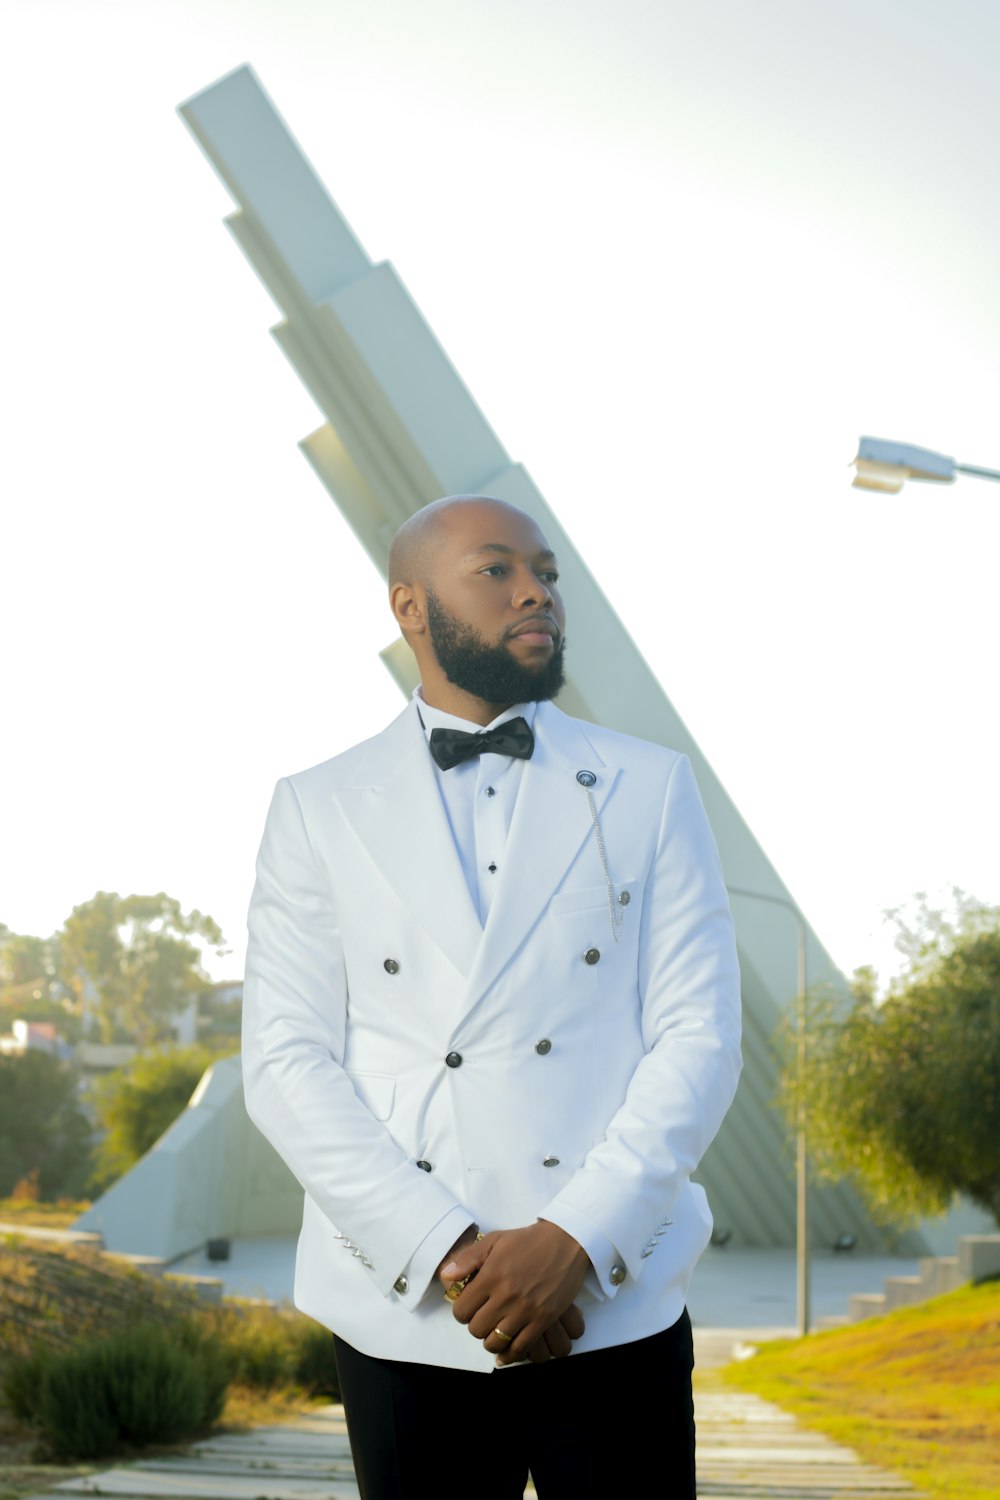 a man wearing a white tuxedo and bow tie